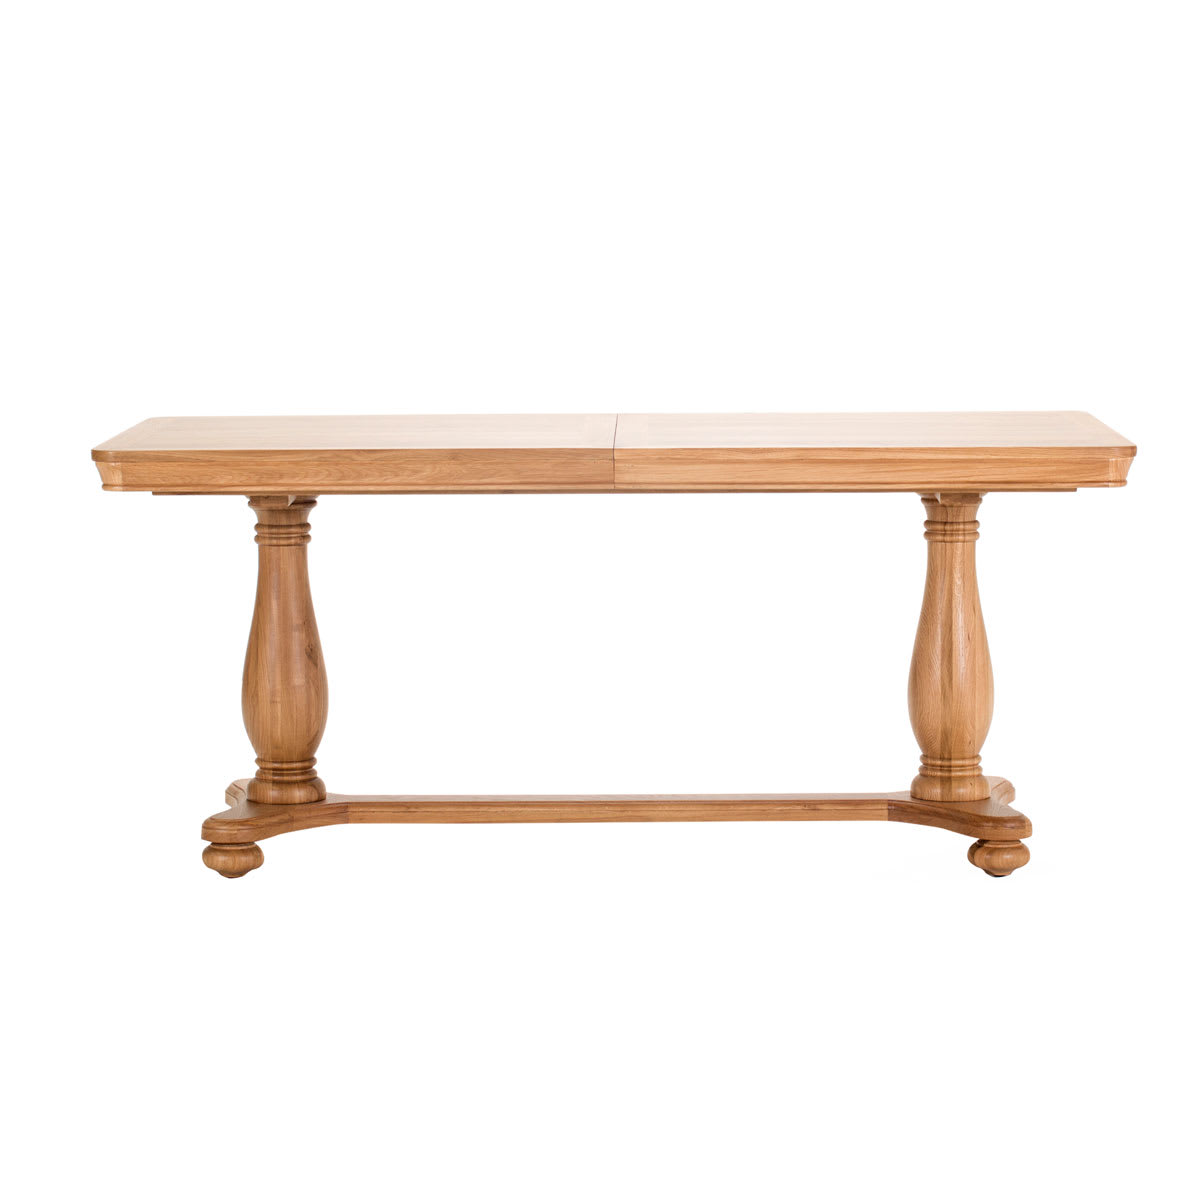 French Style Oak Extending Dining Table 2.3m